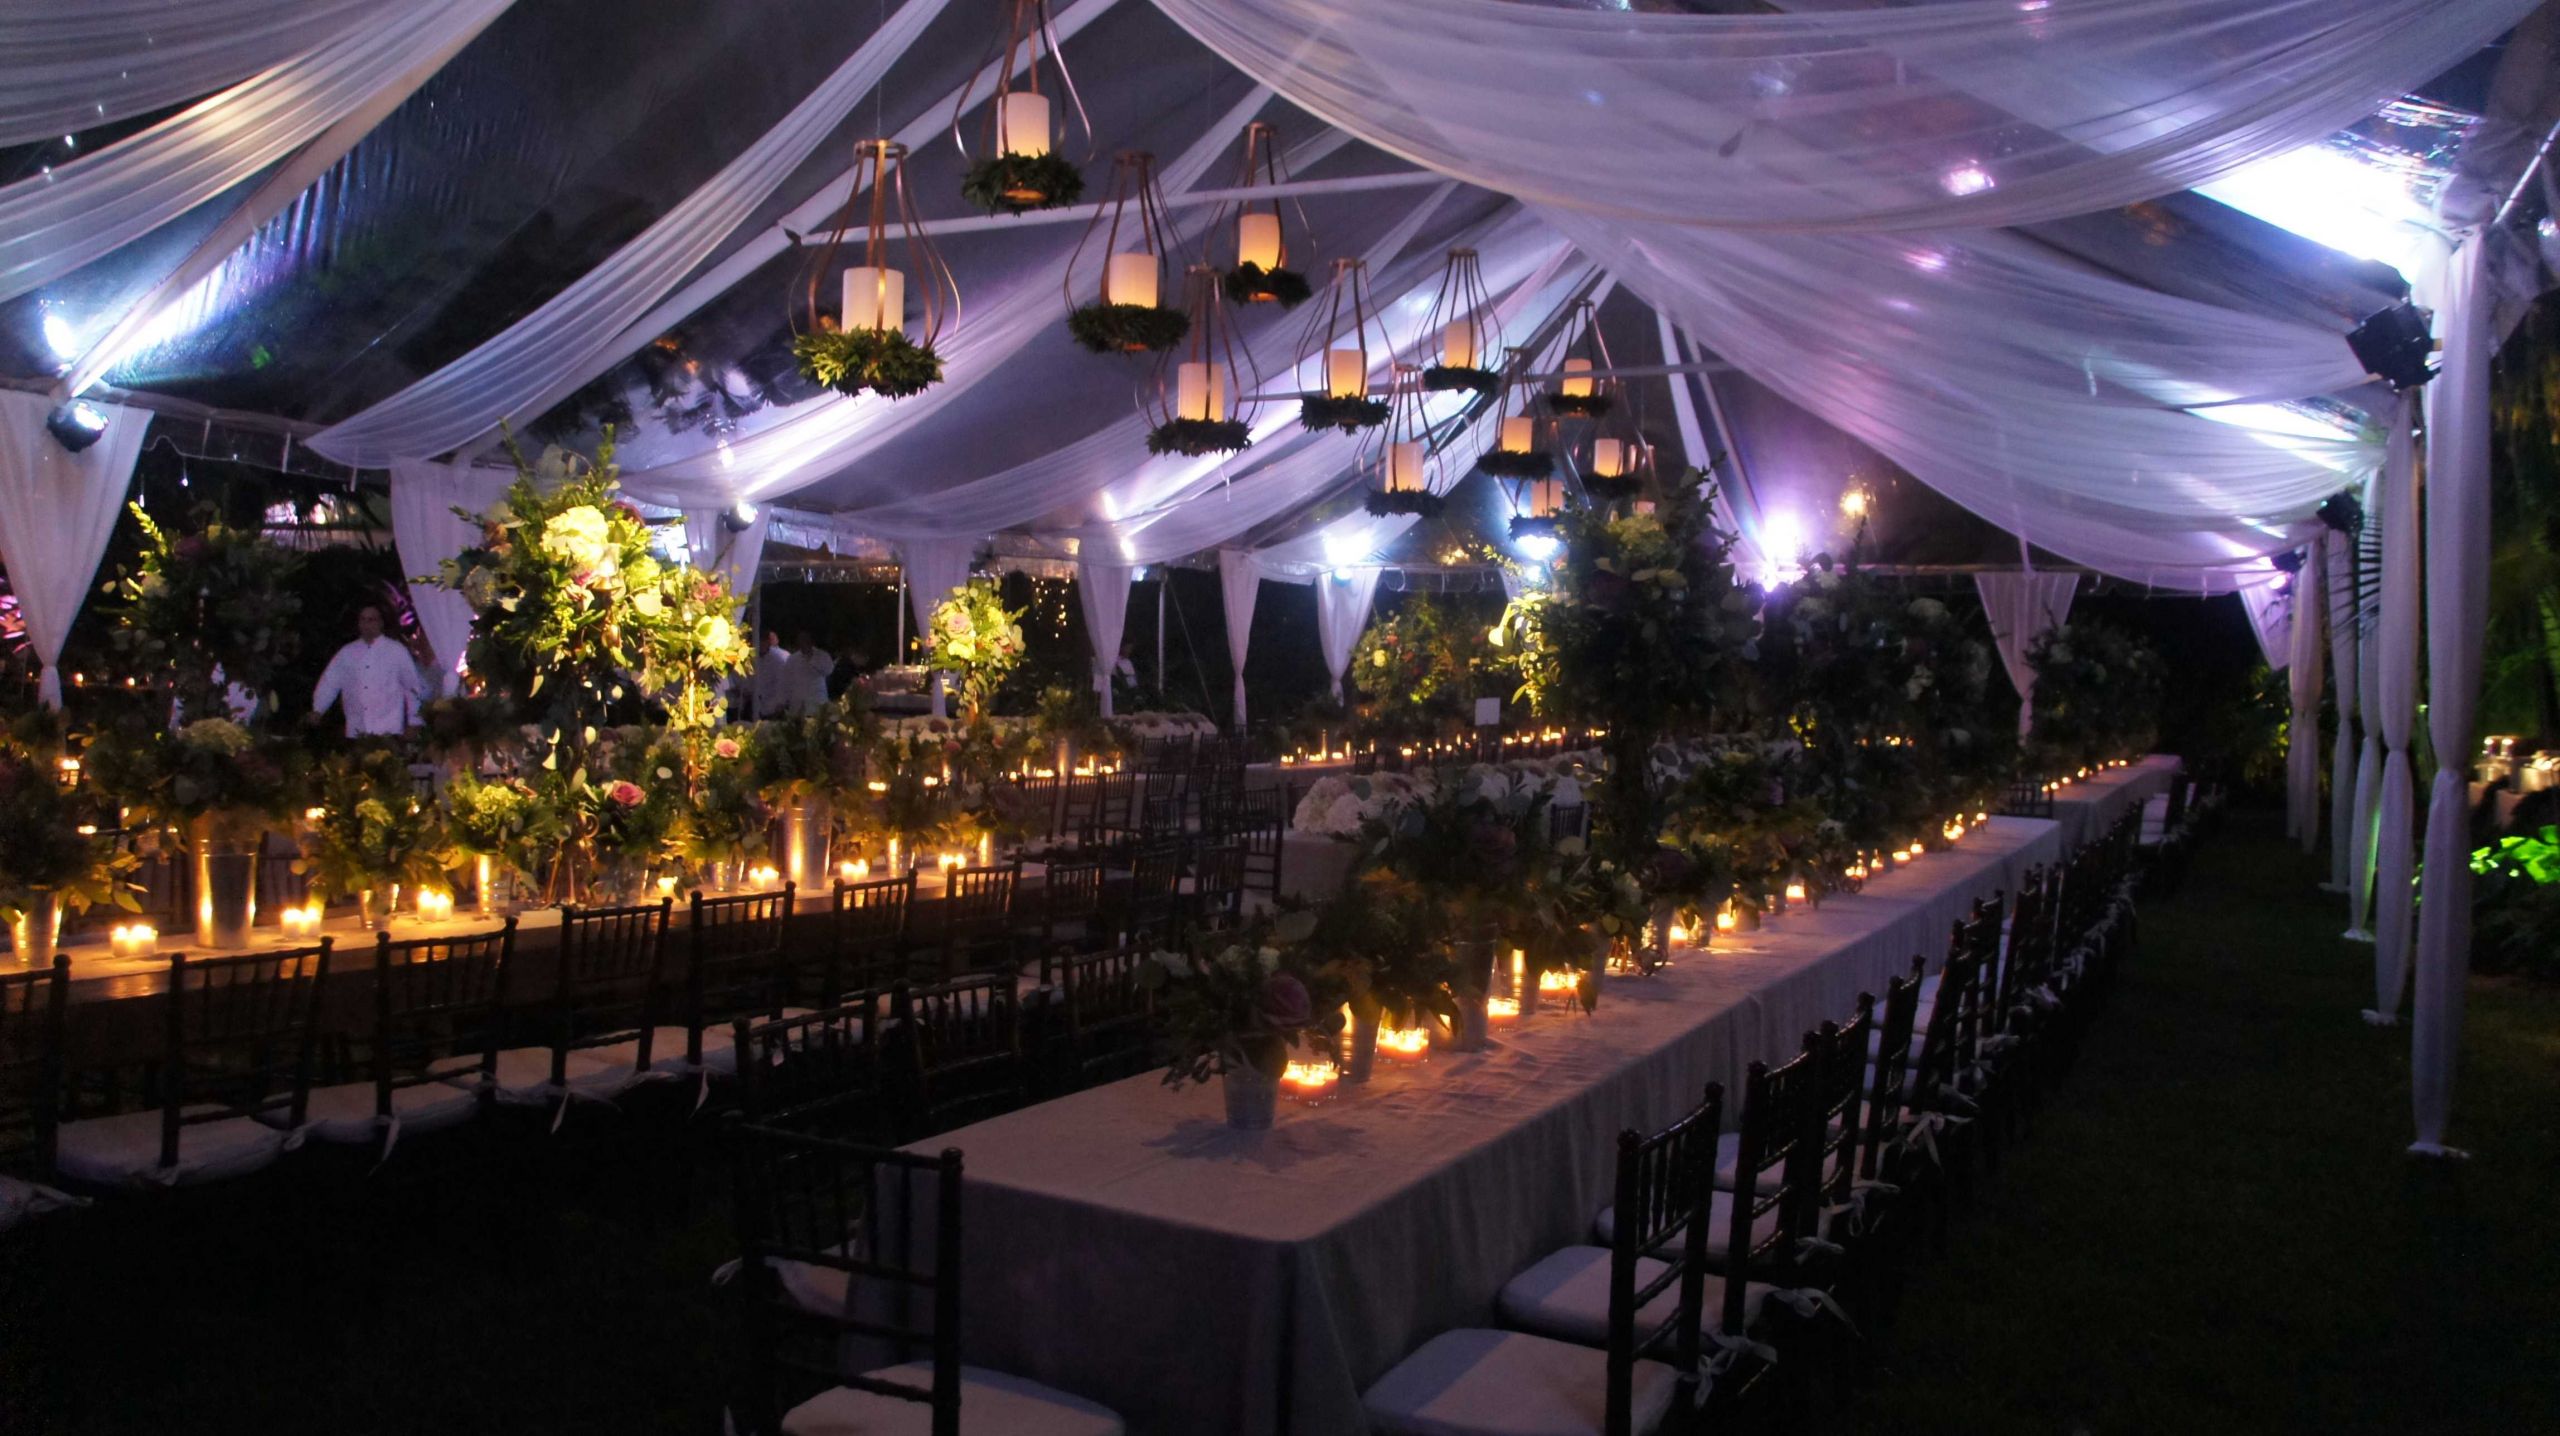 Backyard Party Lighting Ideas
 9 Great Party Tent Lighting Ideas For Outdoor Events